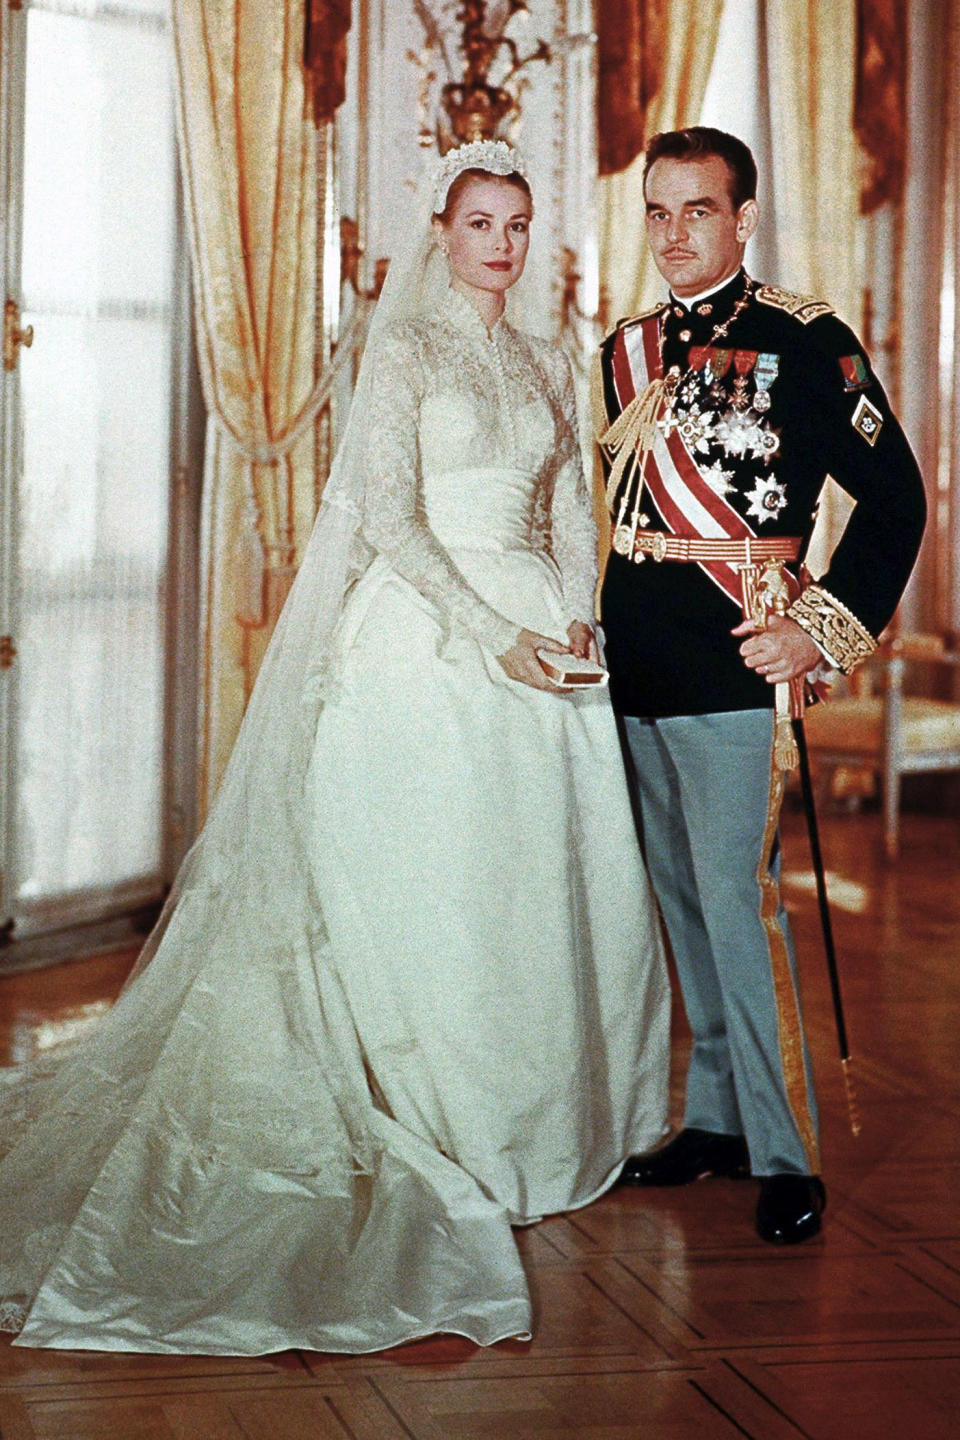 The "Other" Wedding Dress Grace Kelly Wore That We Adore